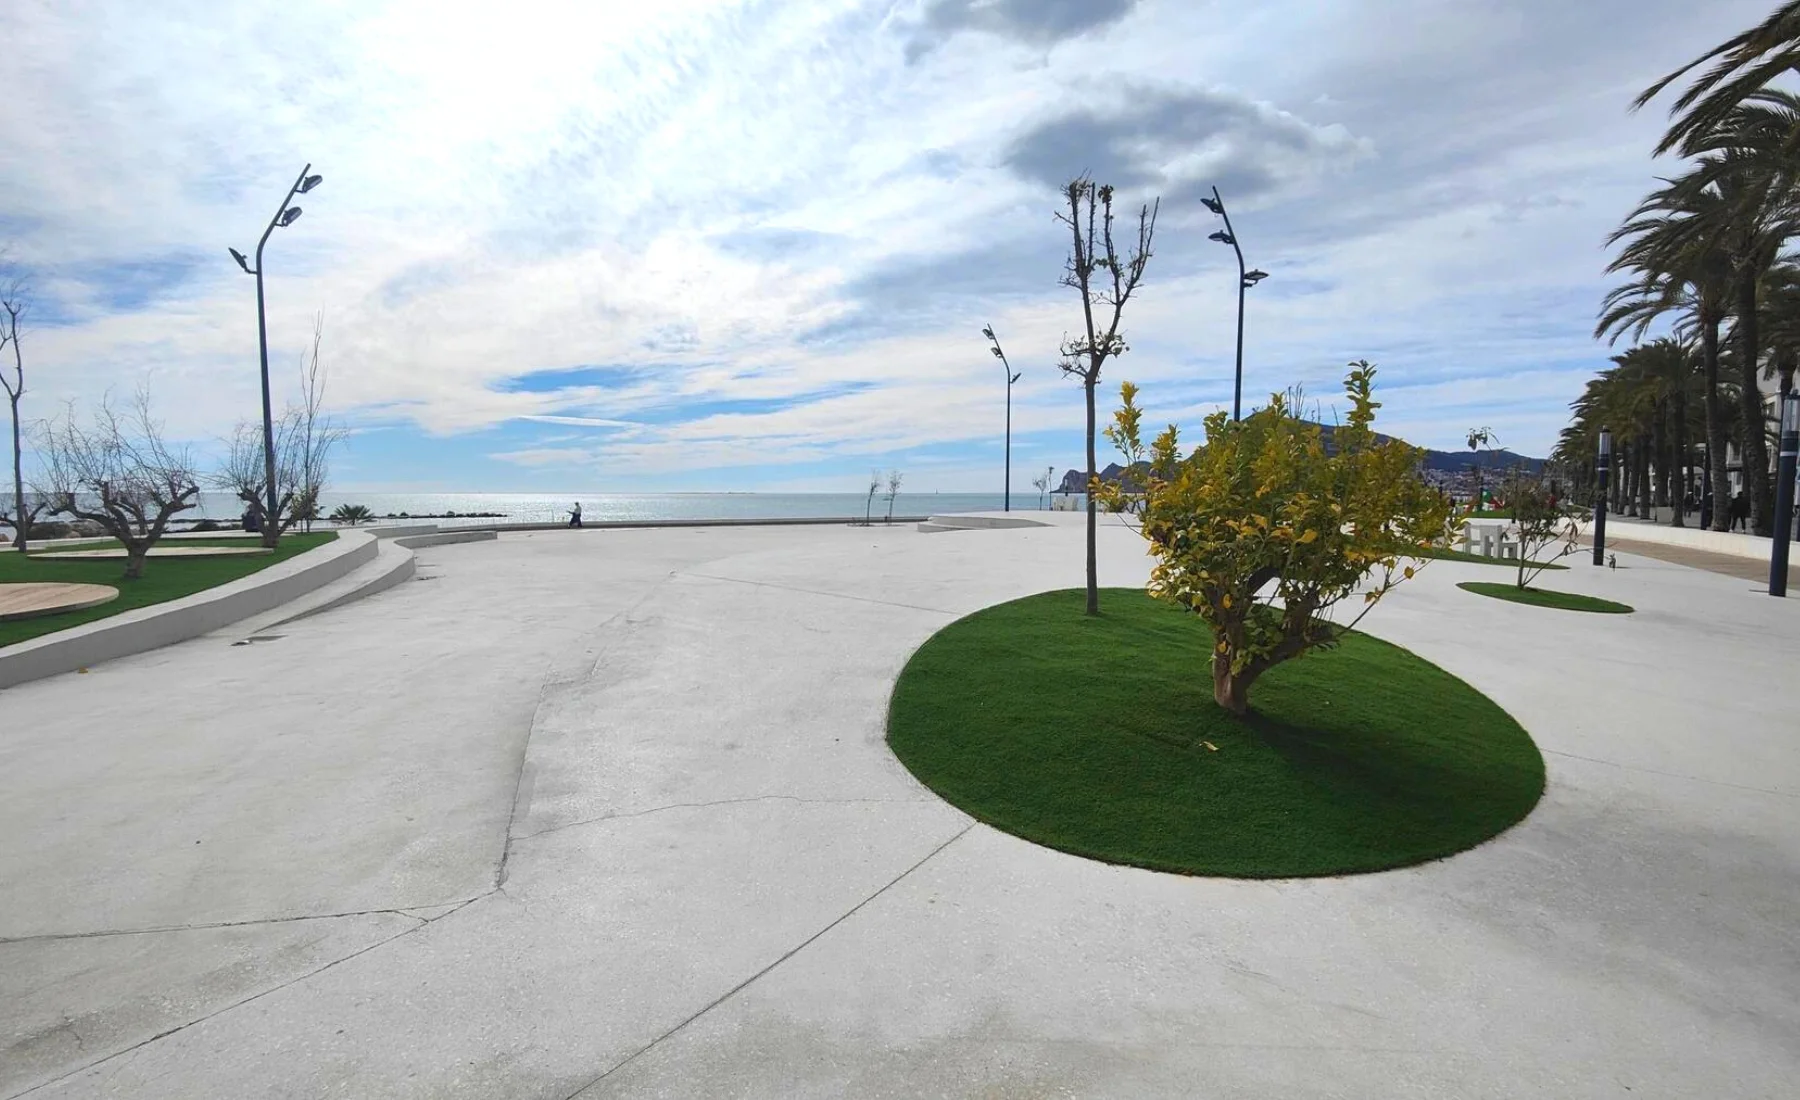 Rounded shapes and trees on Altea's new seafront promenade